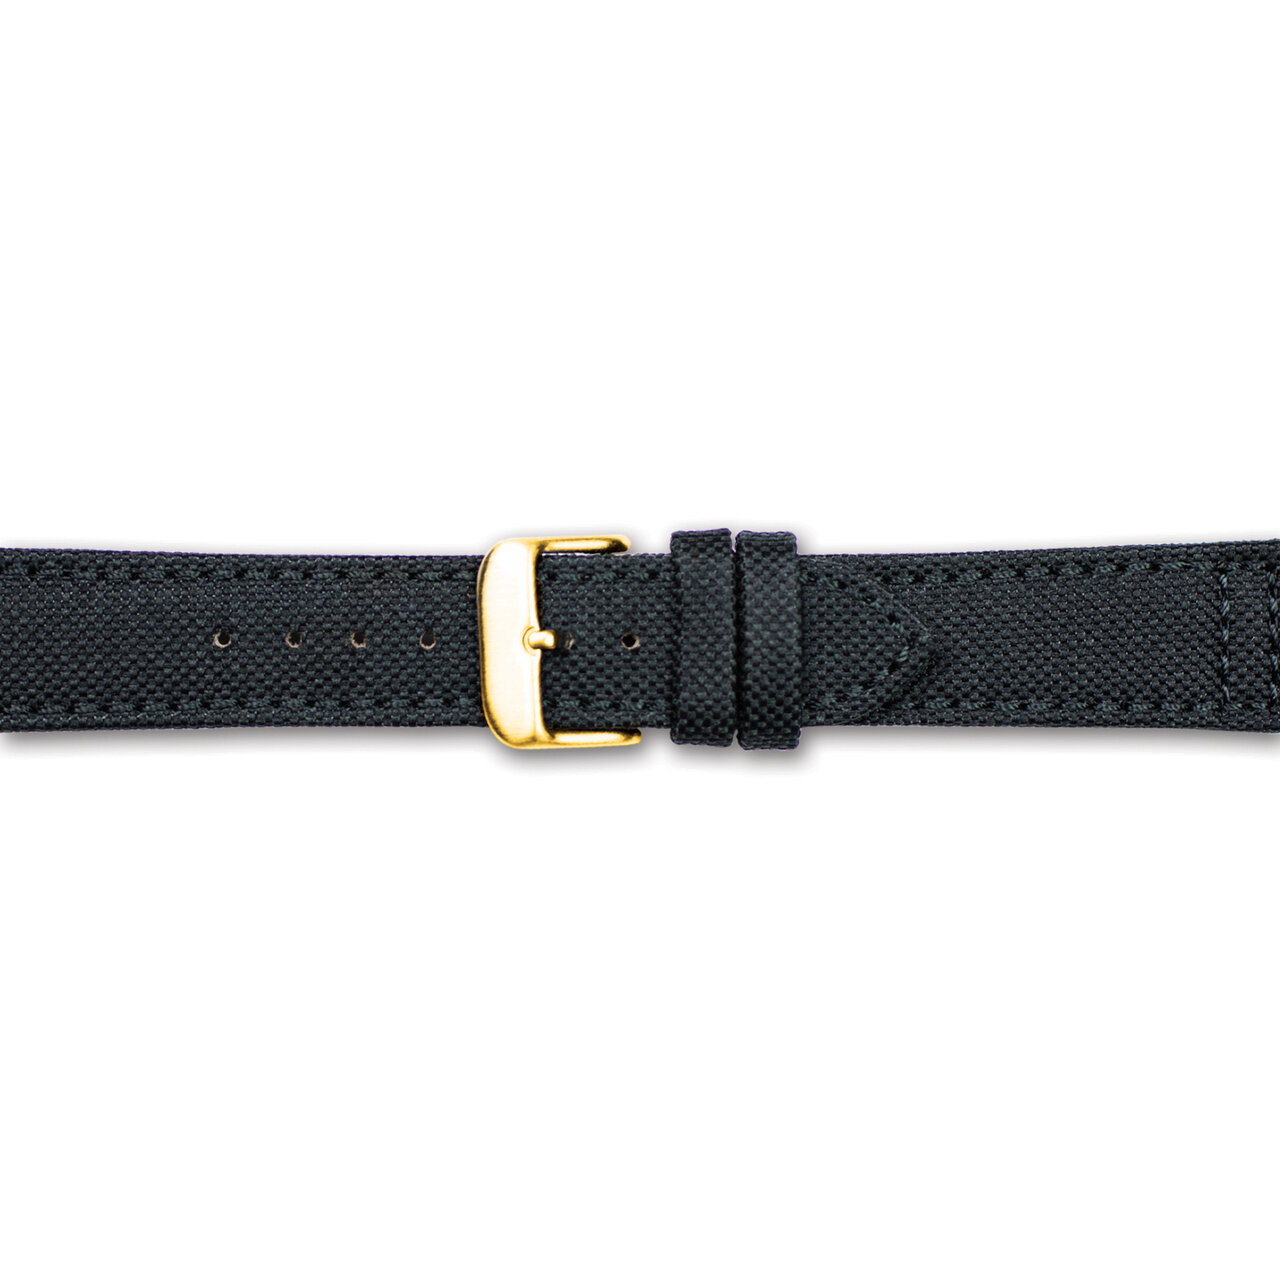 18mm Black Canvas Leather Lining Gold-tone Buckle Watch Band BA386-18